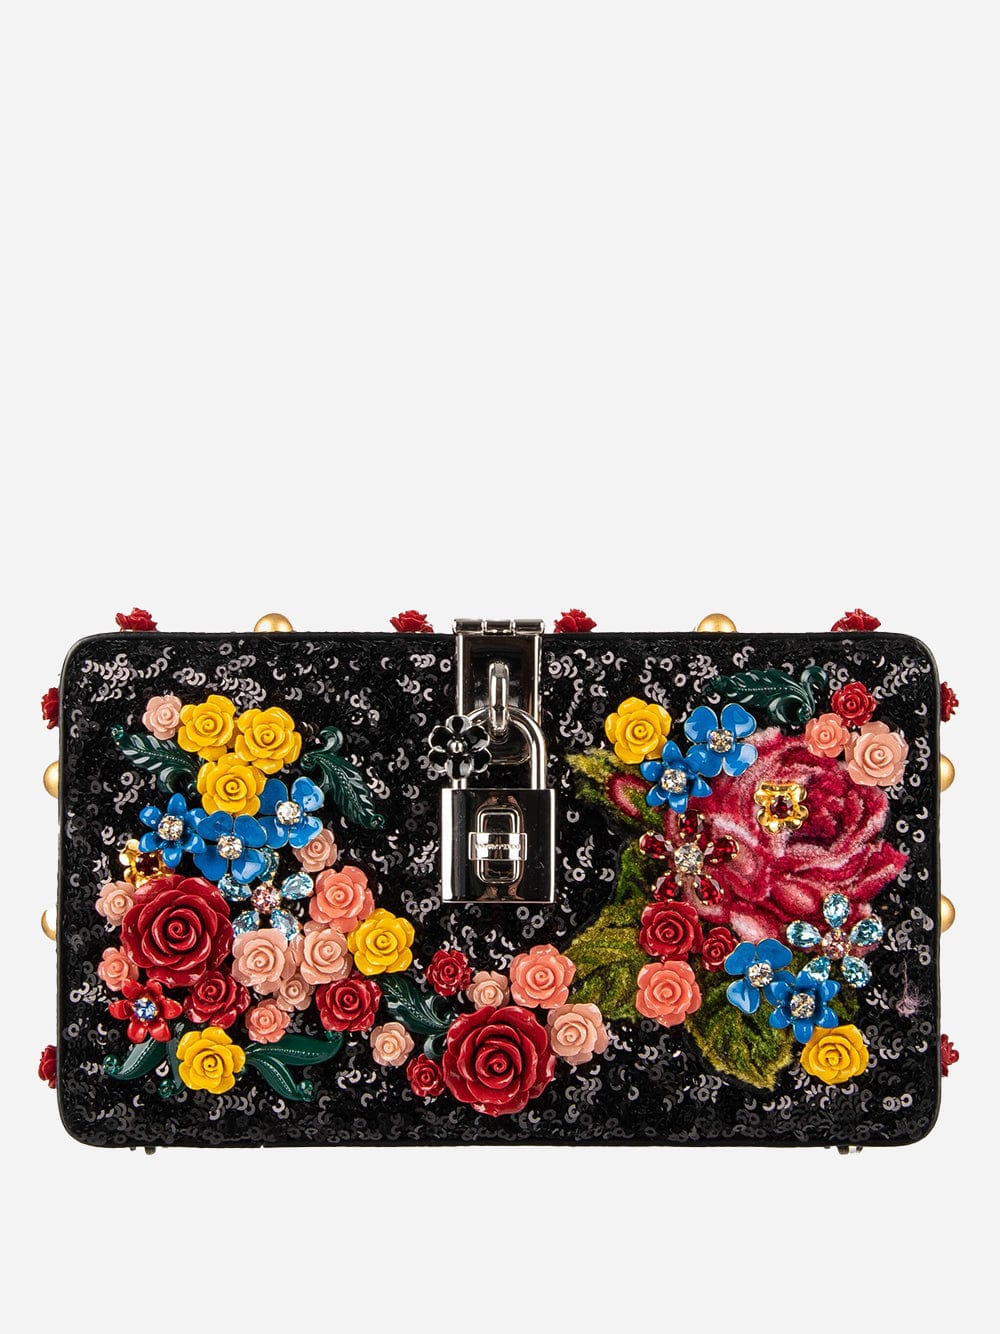 Dolce & Gabbana Sequined Floral Dolce Box